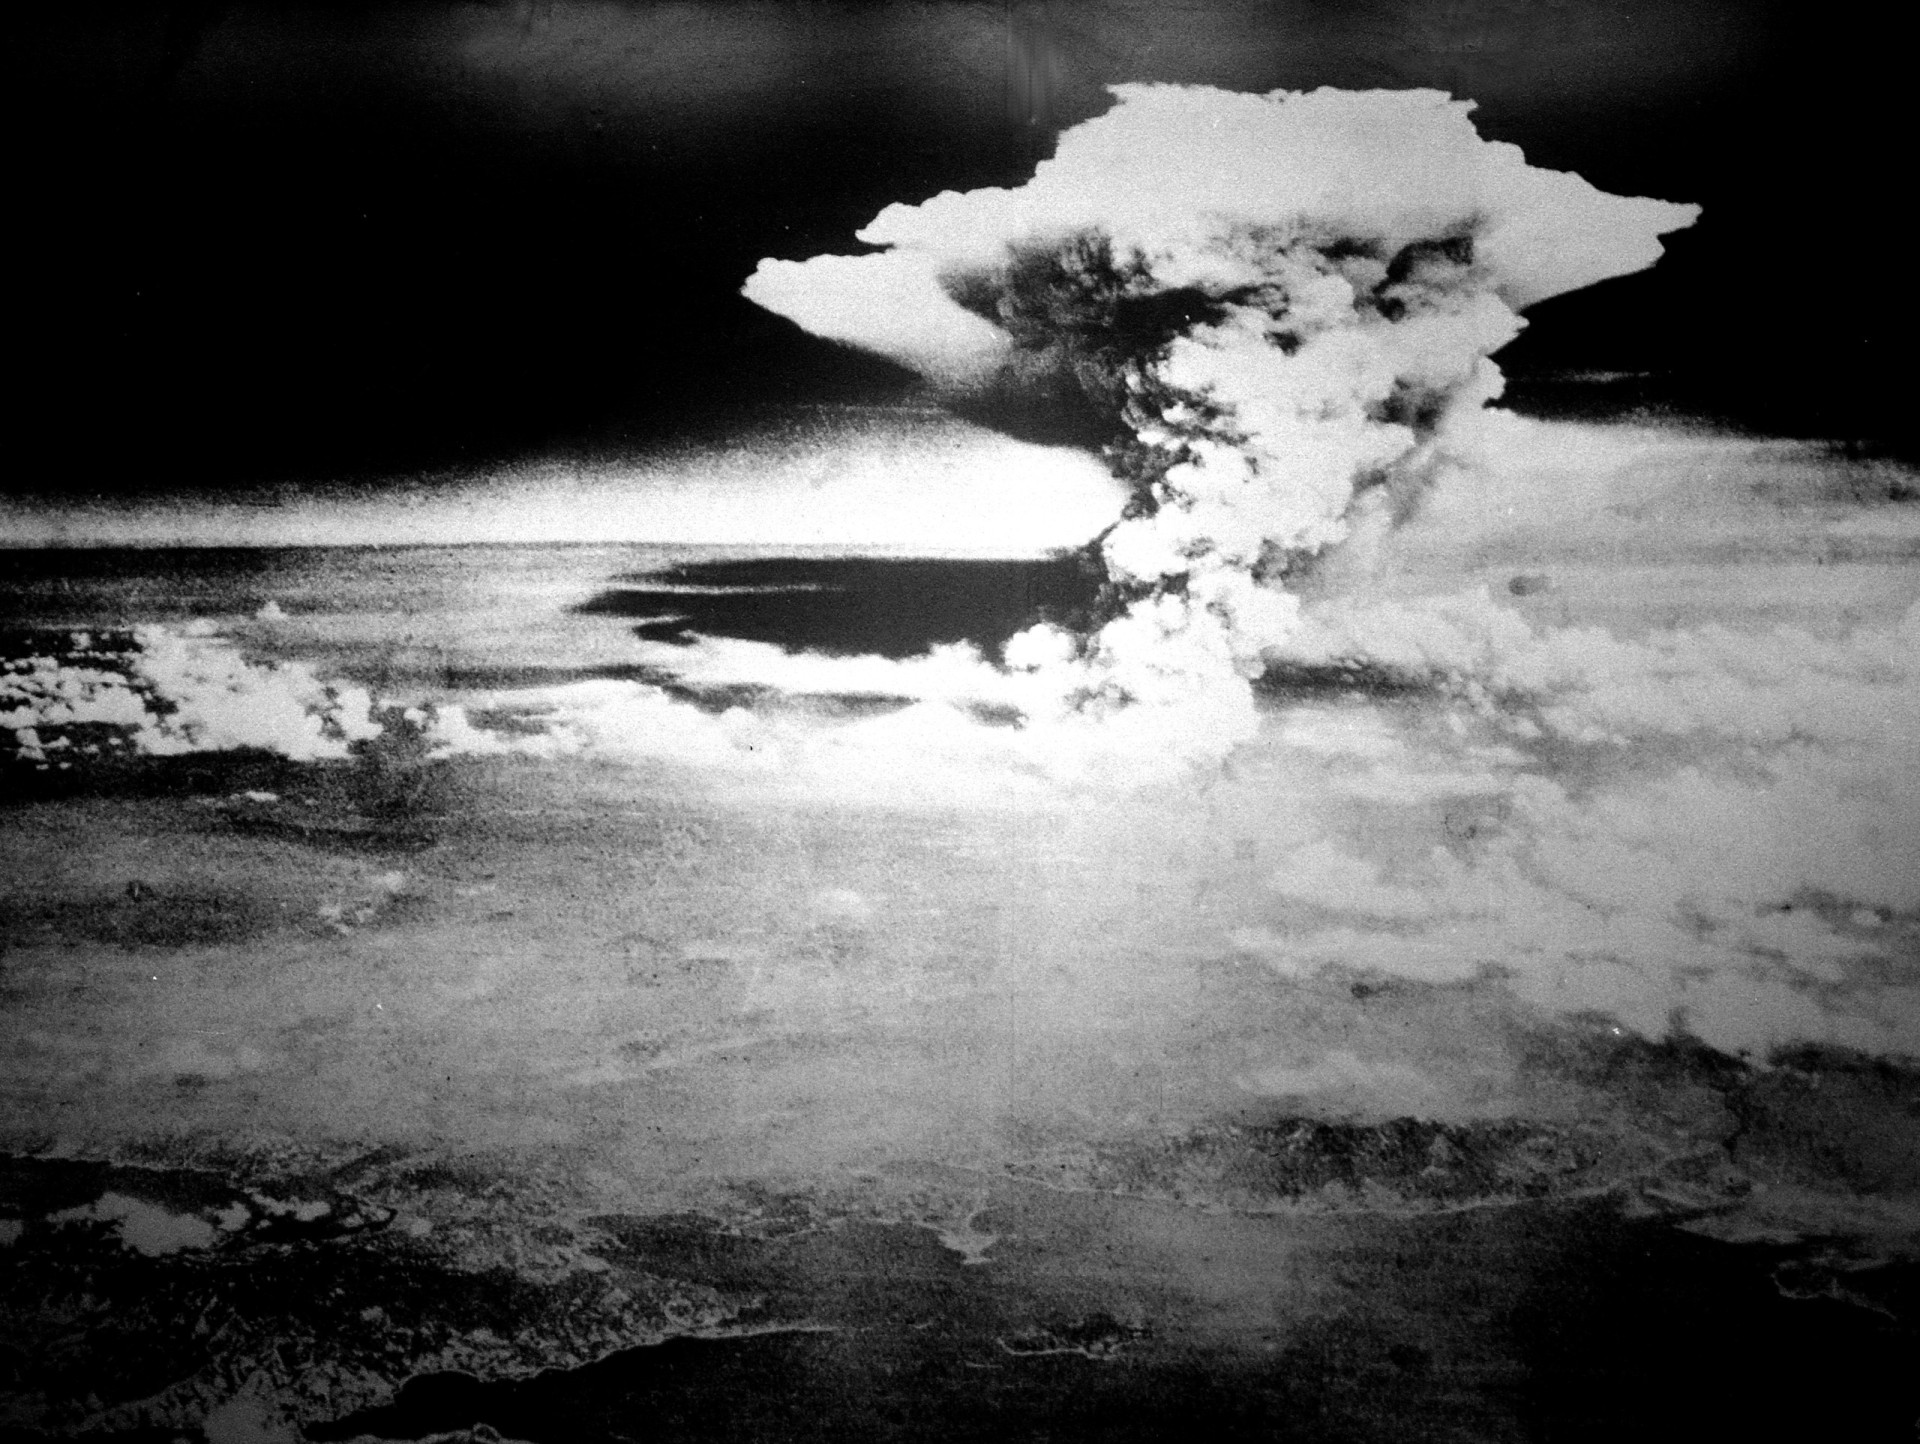 <p>They studied all aspects of the <a href="https://www.starsinsider.com/lifestyle/495220/the-disturbing-evolution-of-nuclear-weapons" rel="noopener">nuclear</a> blast, including the visual impact if it was detonated on the dark or light side of the Moon, as well as dust and gas behavior.</p><p>You may also like:<a href="https://www.starsinsider.com/n/342686?utm_source=msn.com&utm_medium=display&utm_campaign=referral_description&utm_content=713901en-en"> Fascinating ice discoveries frozen in time</a></p>